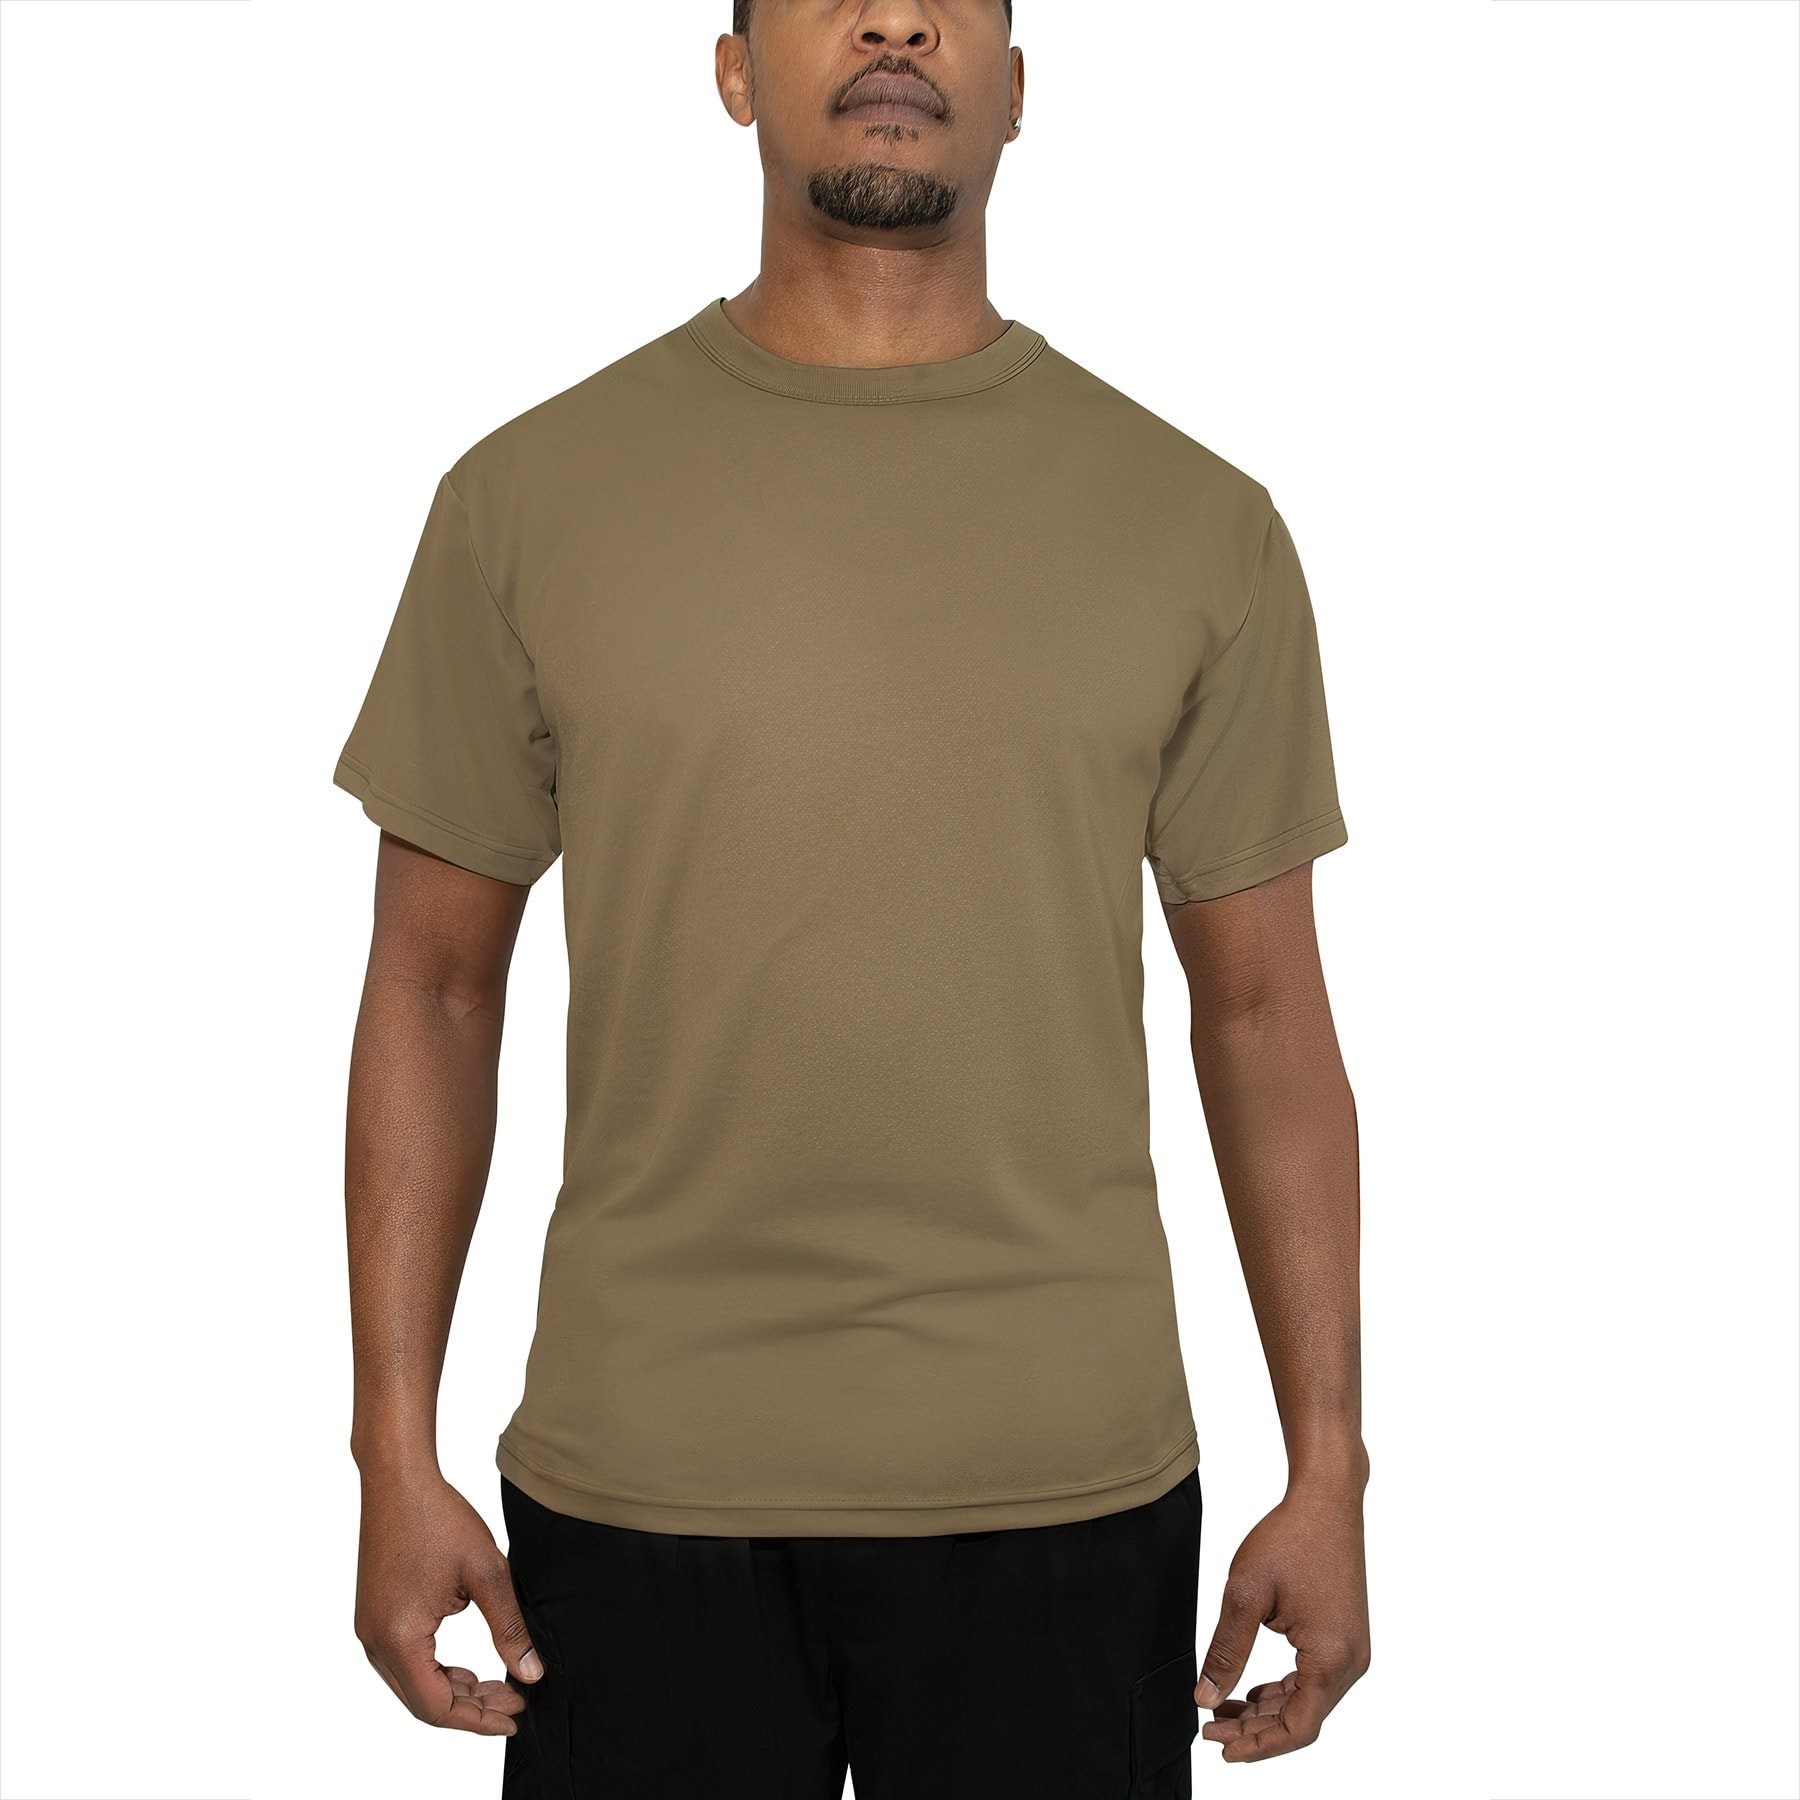 ROTHCO Quick Dry Moisture Wick T-shirt BROWN